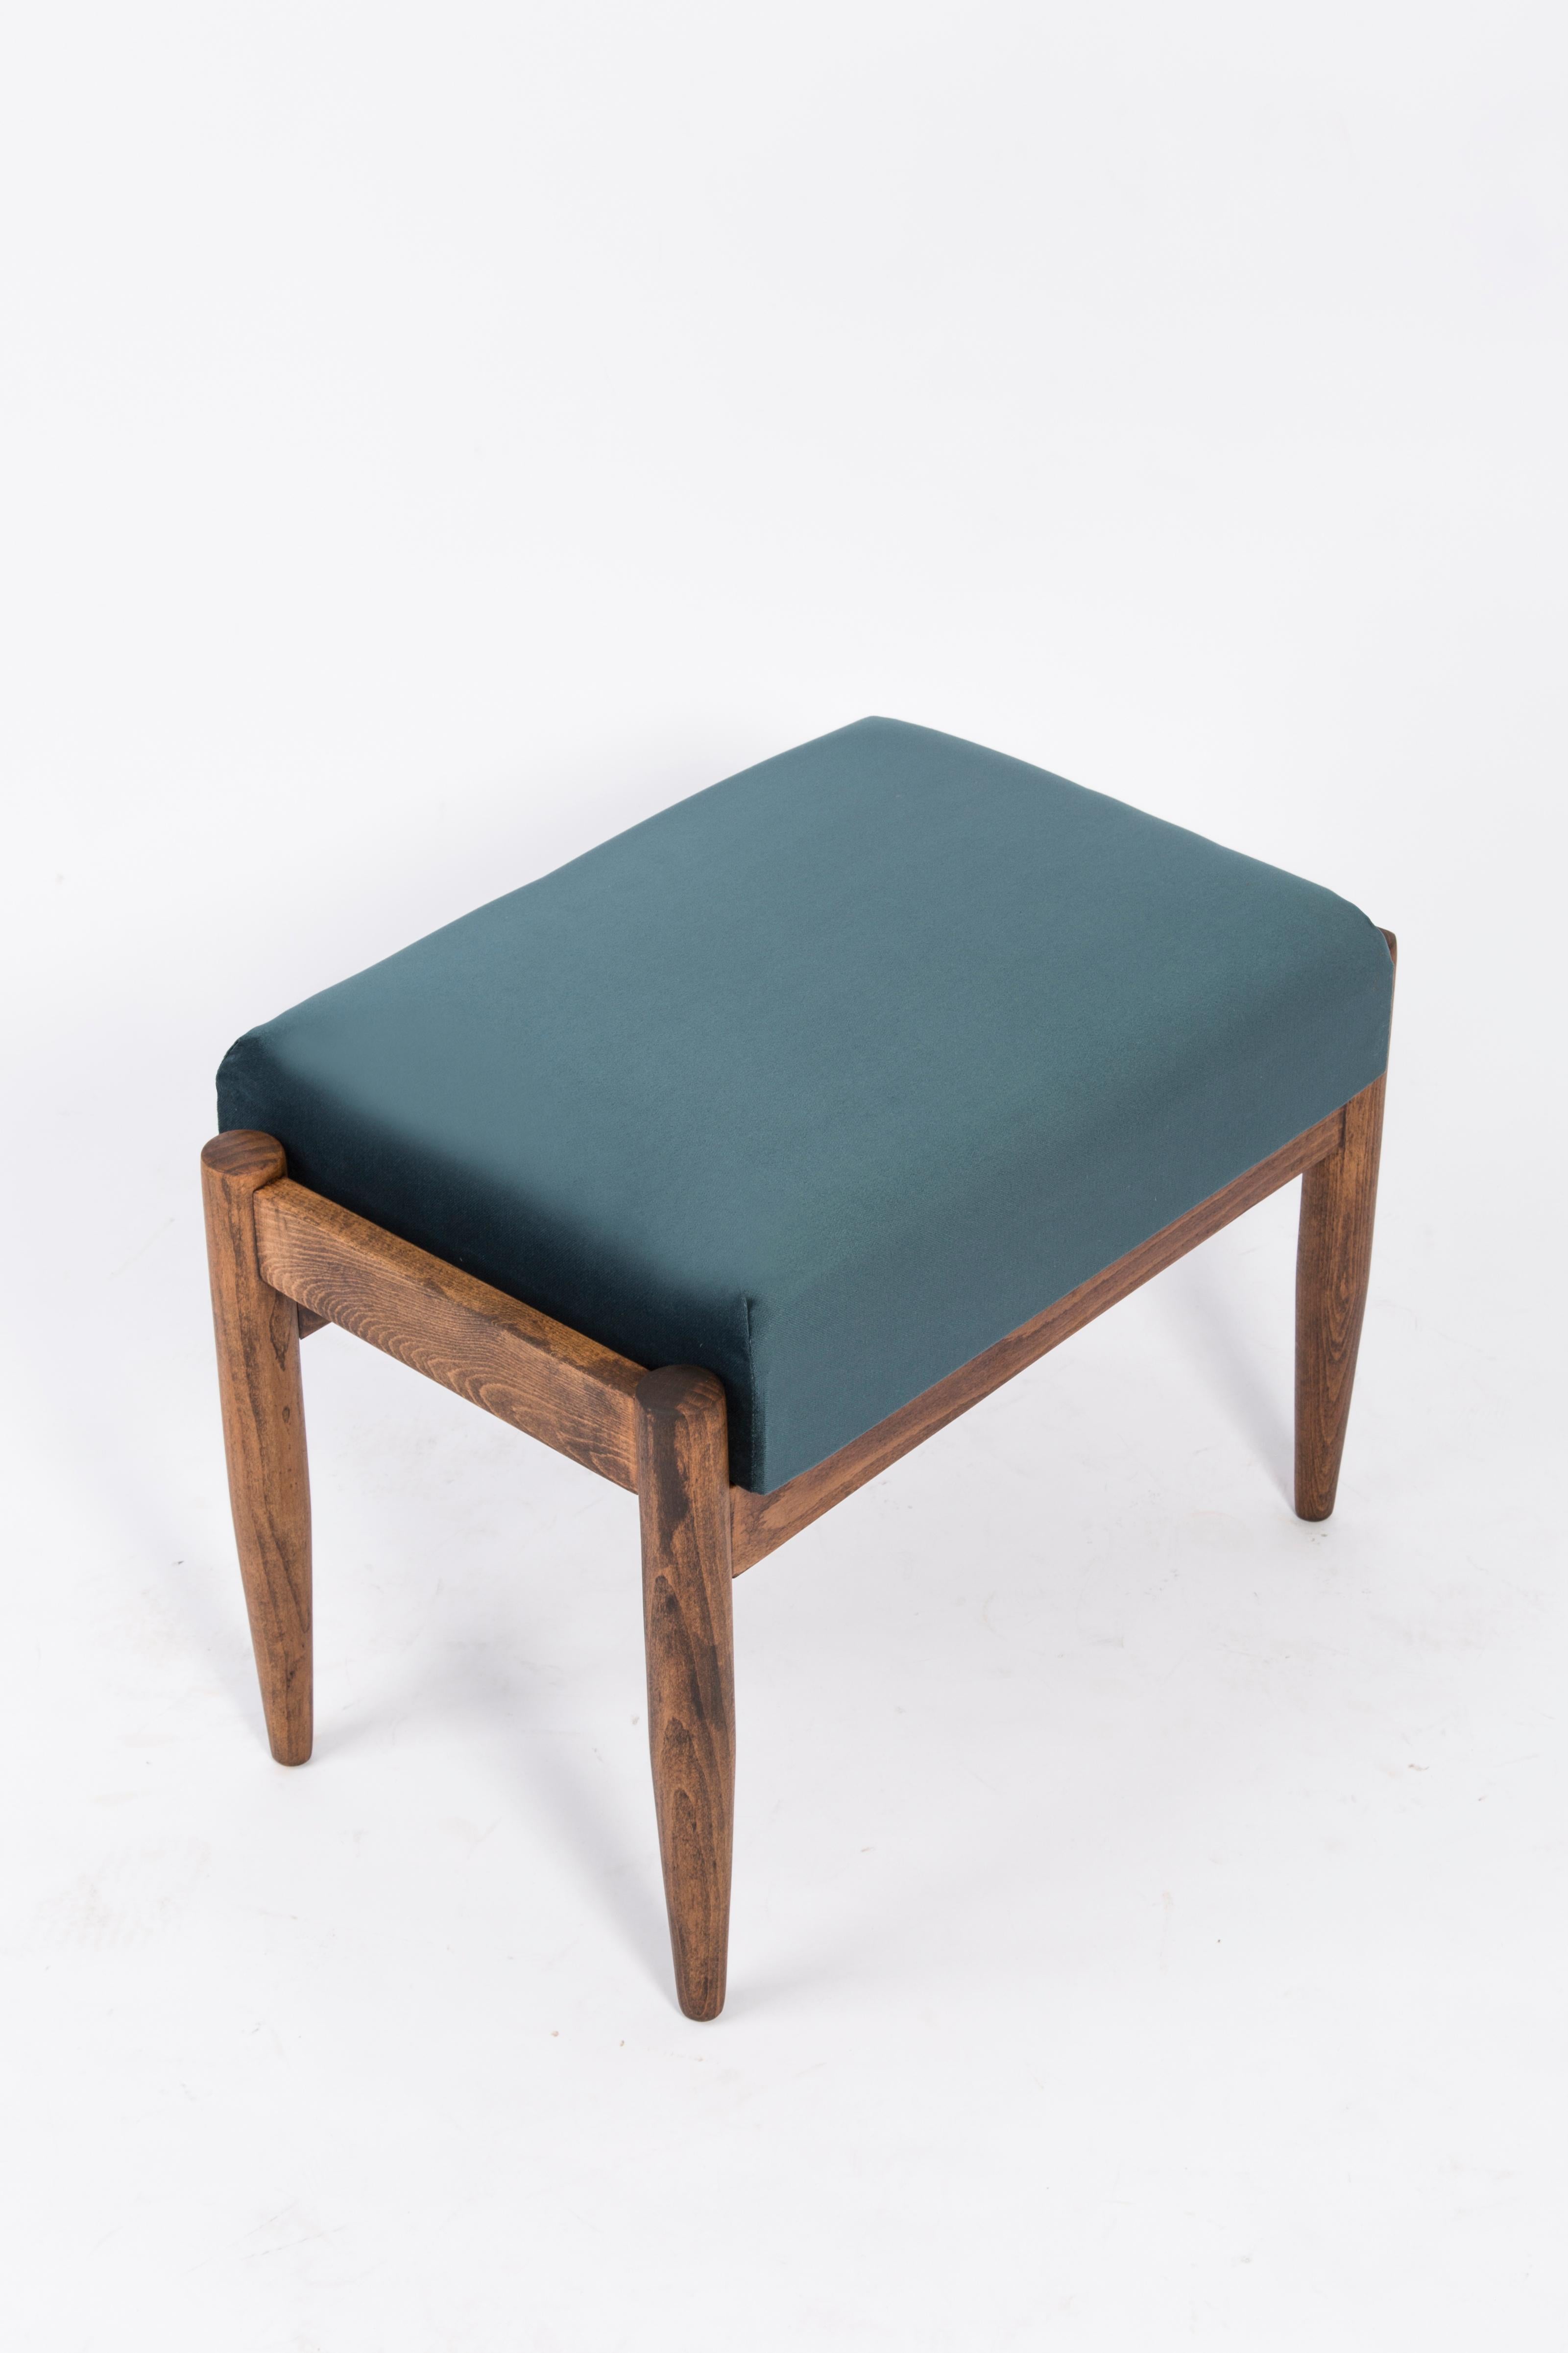 Textile Set of Petrol Blue Vintage Armchair and Stool, Edmund Homa, 1960s For Sale